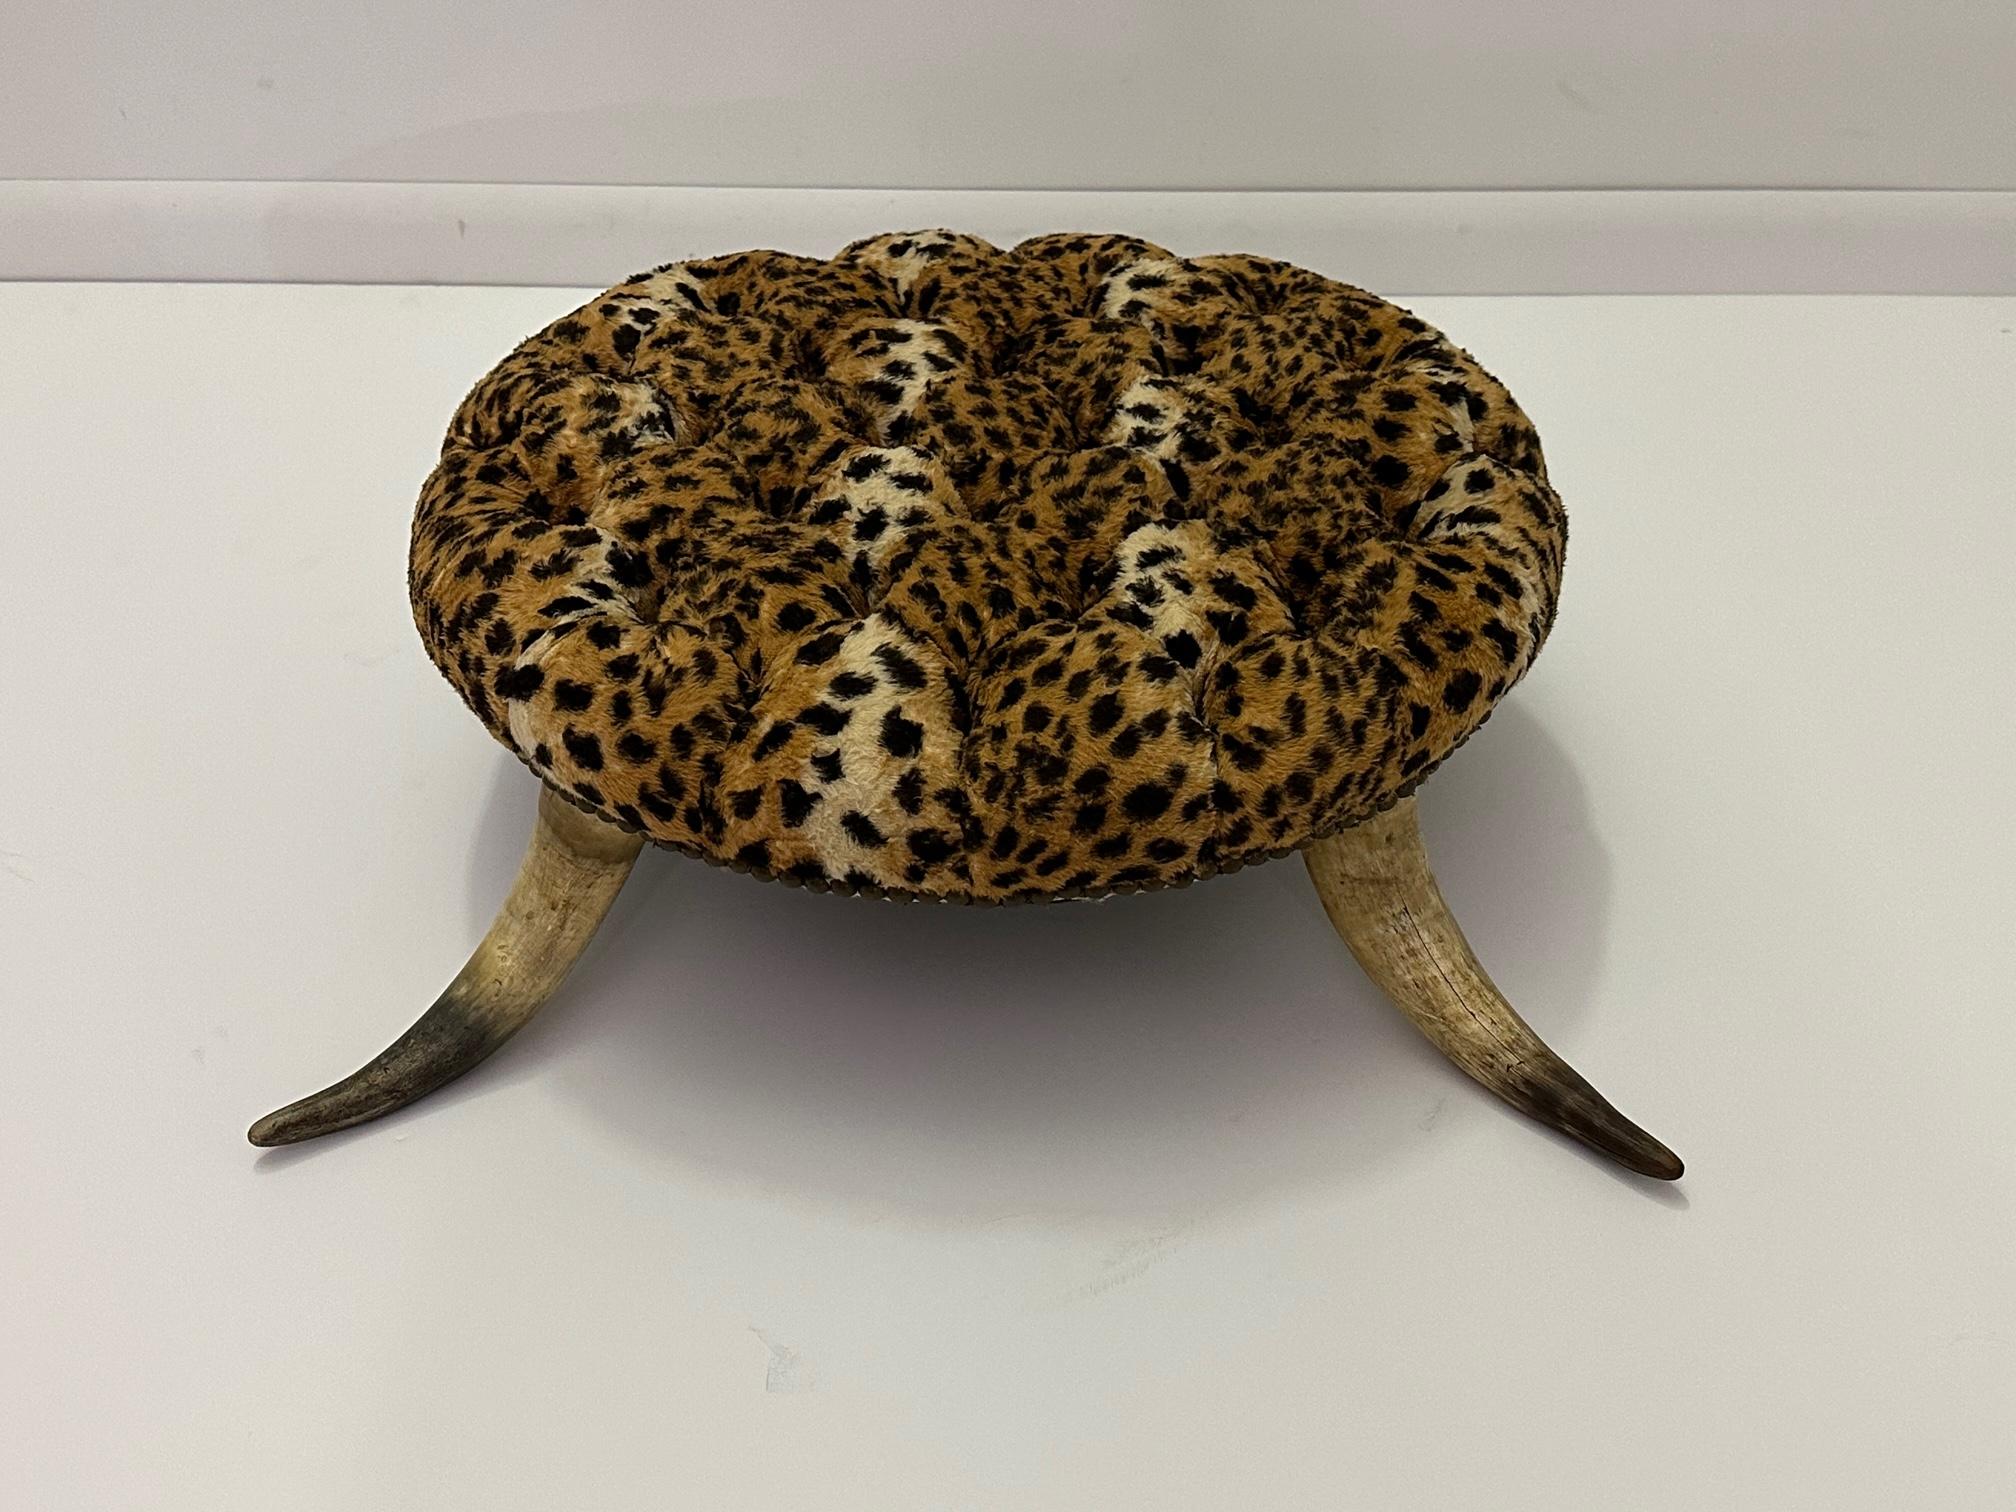 19th Century Sensational Anique Round Tufted Faux Leopard Stool with Horn Legs